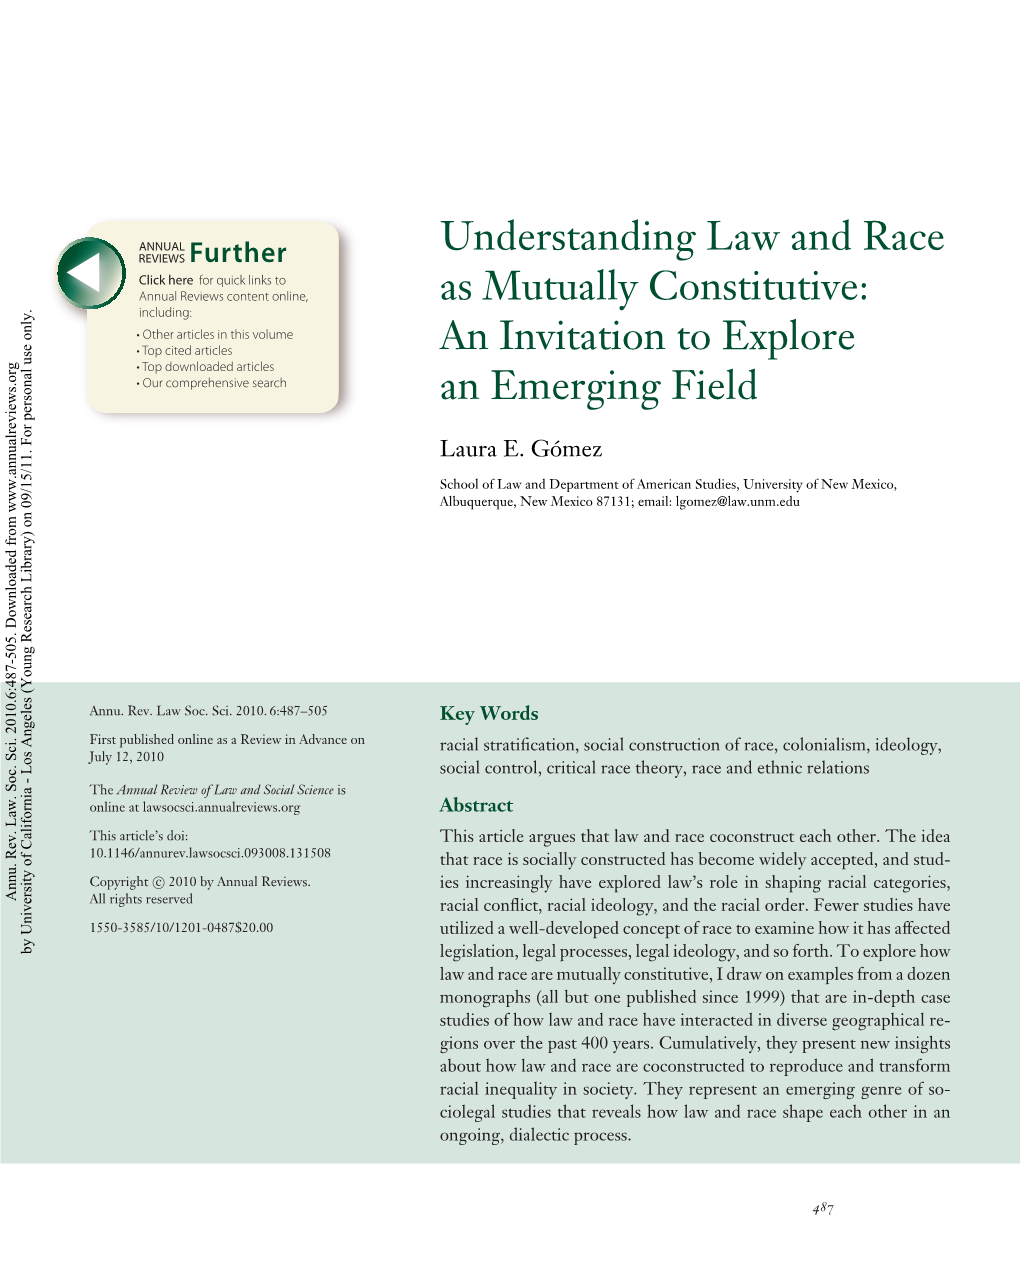 Understanding Law and Race As Mutually Constitutive: an Invitation to Explore an Emerging Field